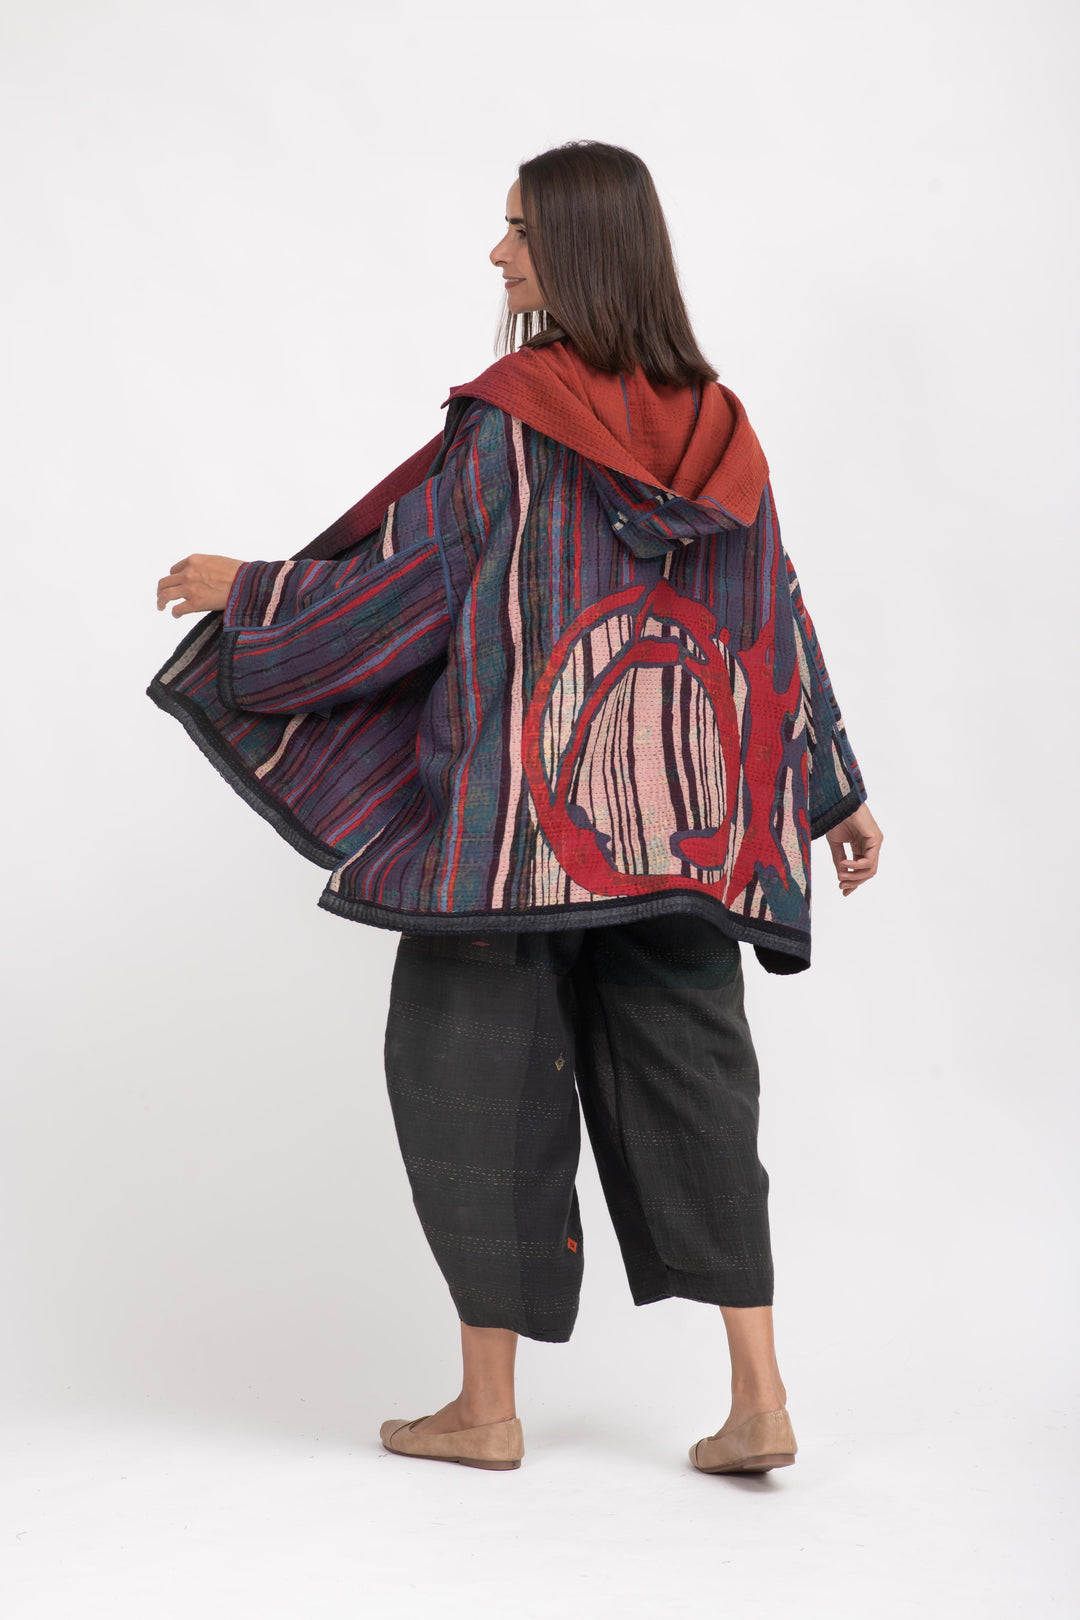 STRIPE AND BENDS KANTHA HOODIE PONCHO - sb4064-red -